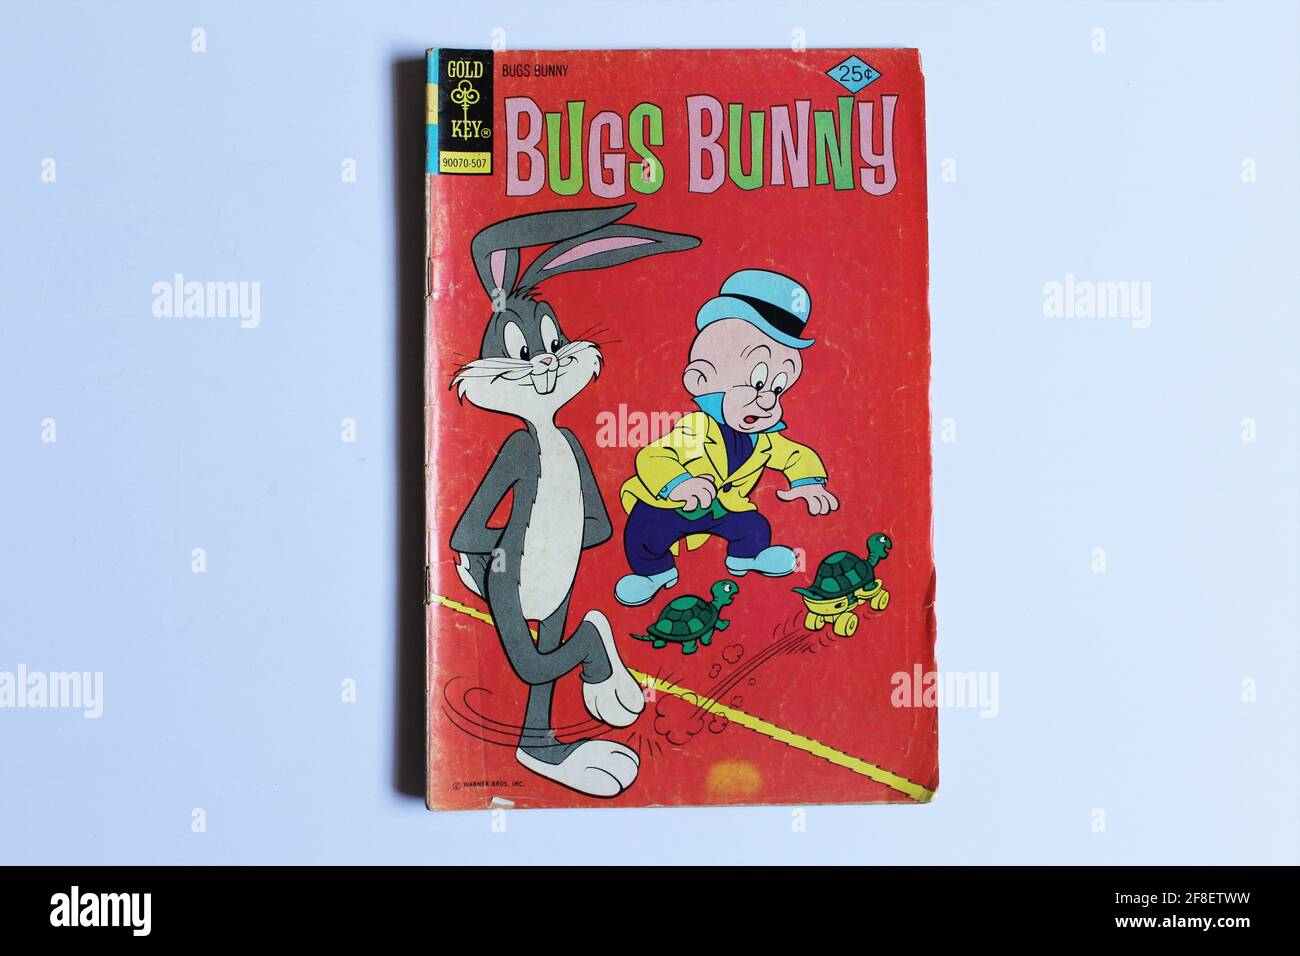 BUGS BUNNY #164 comic book. Comic book adventures of the famous Warner Bros. cartoon character Bugs Bunny by Gold Key Comics Stock Photo